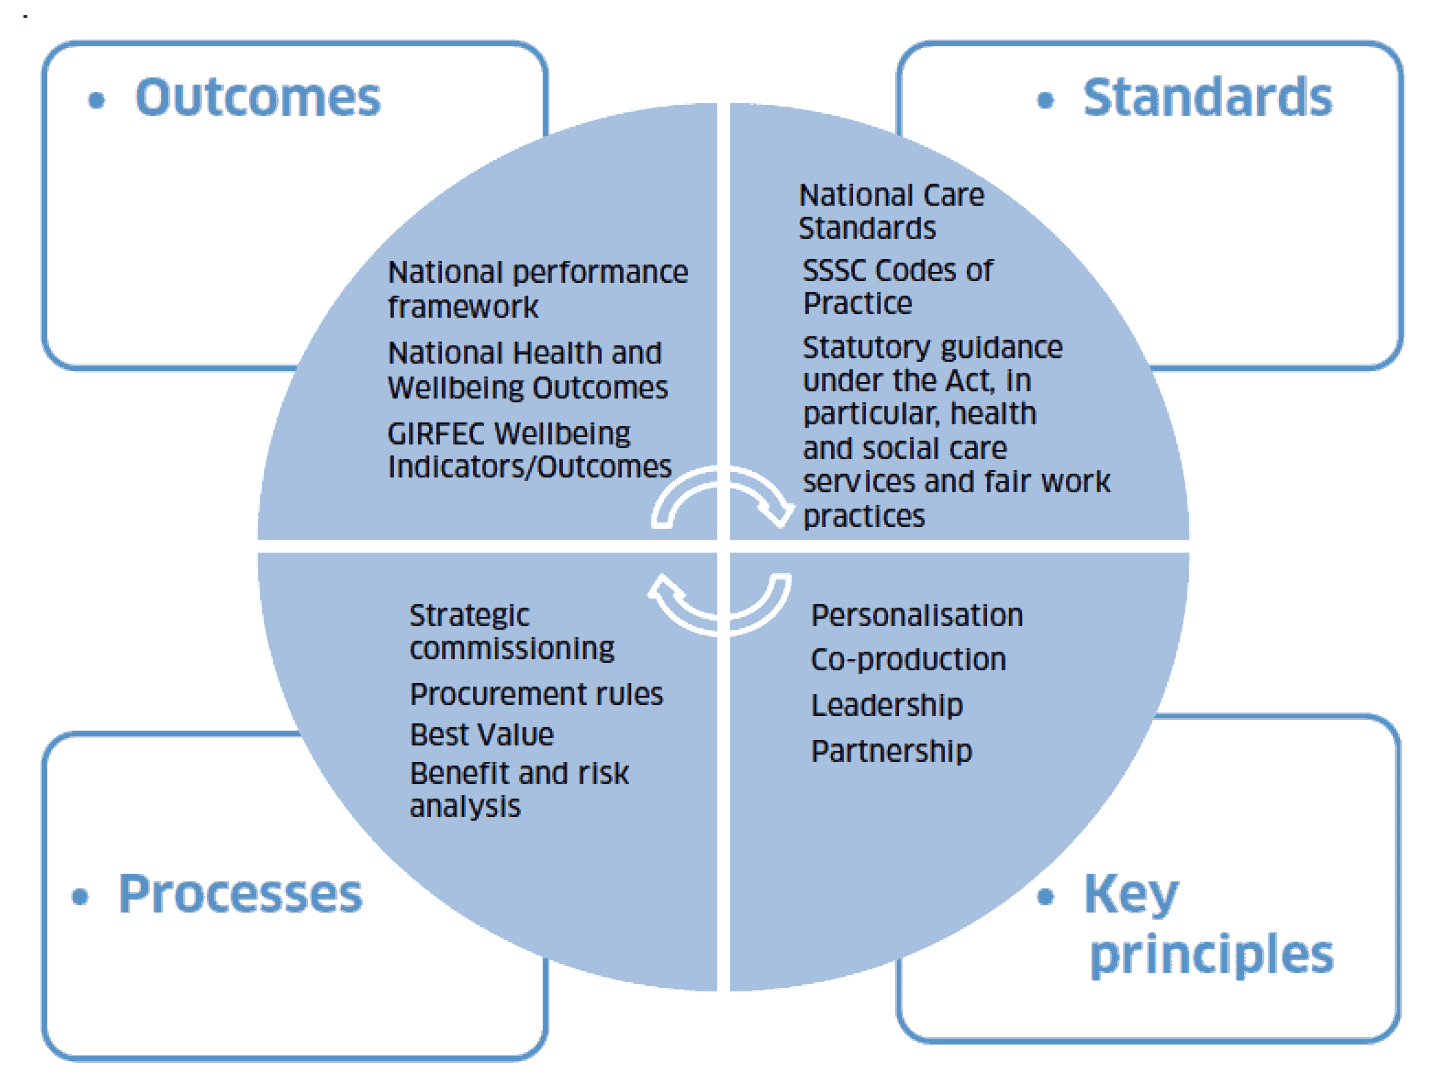 The diagram summarises the key considerations for procuring care and support services that are described in Chapter 4 